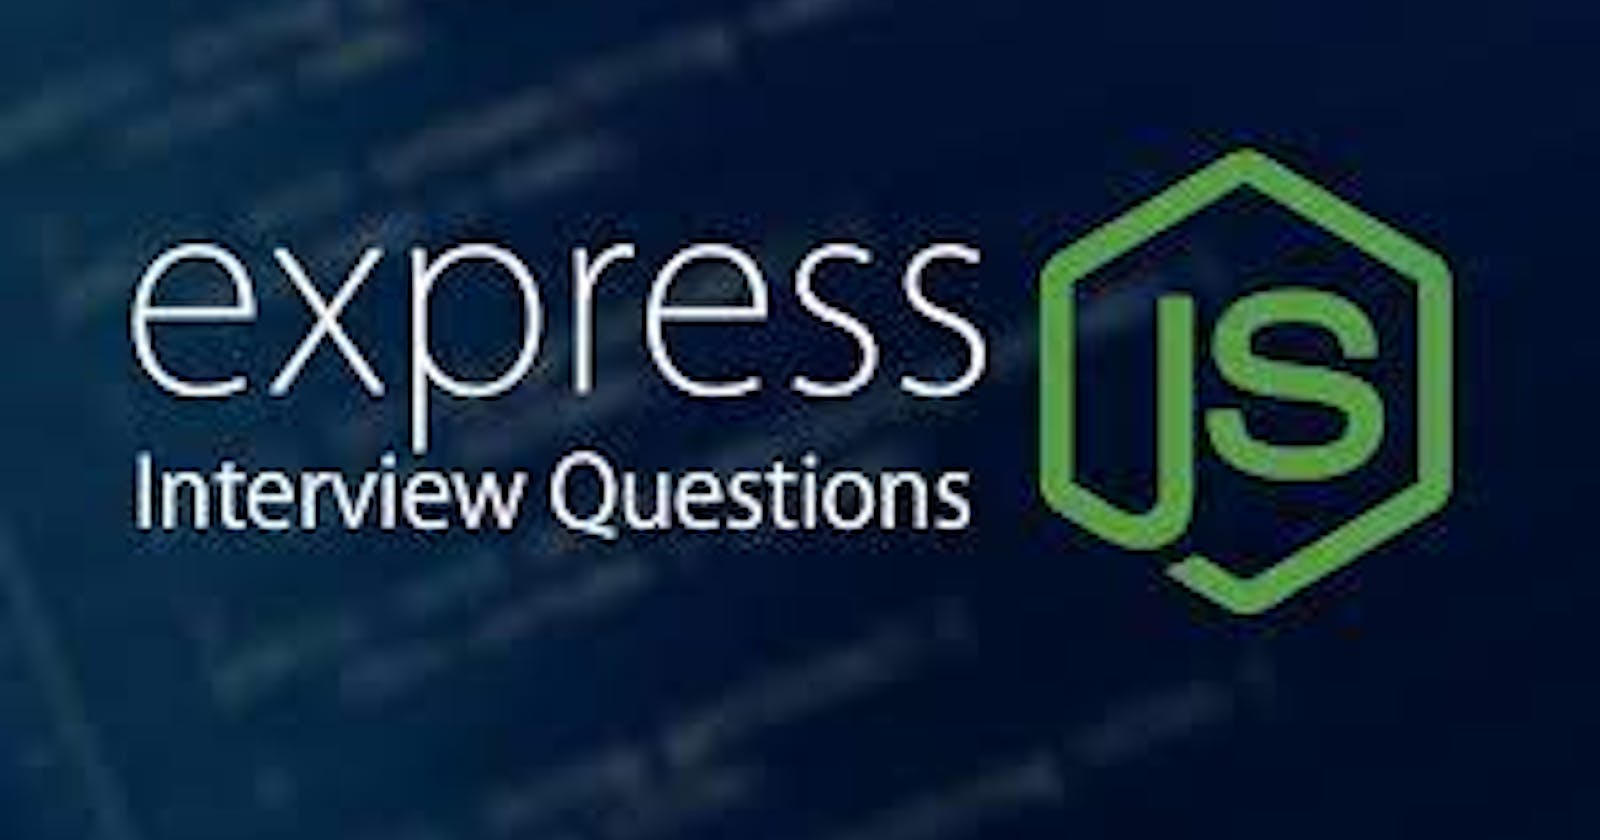 Express JS typical interview questions